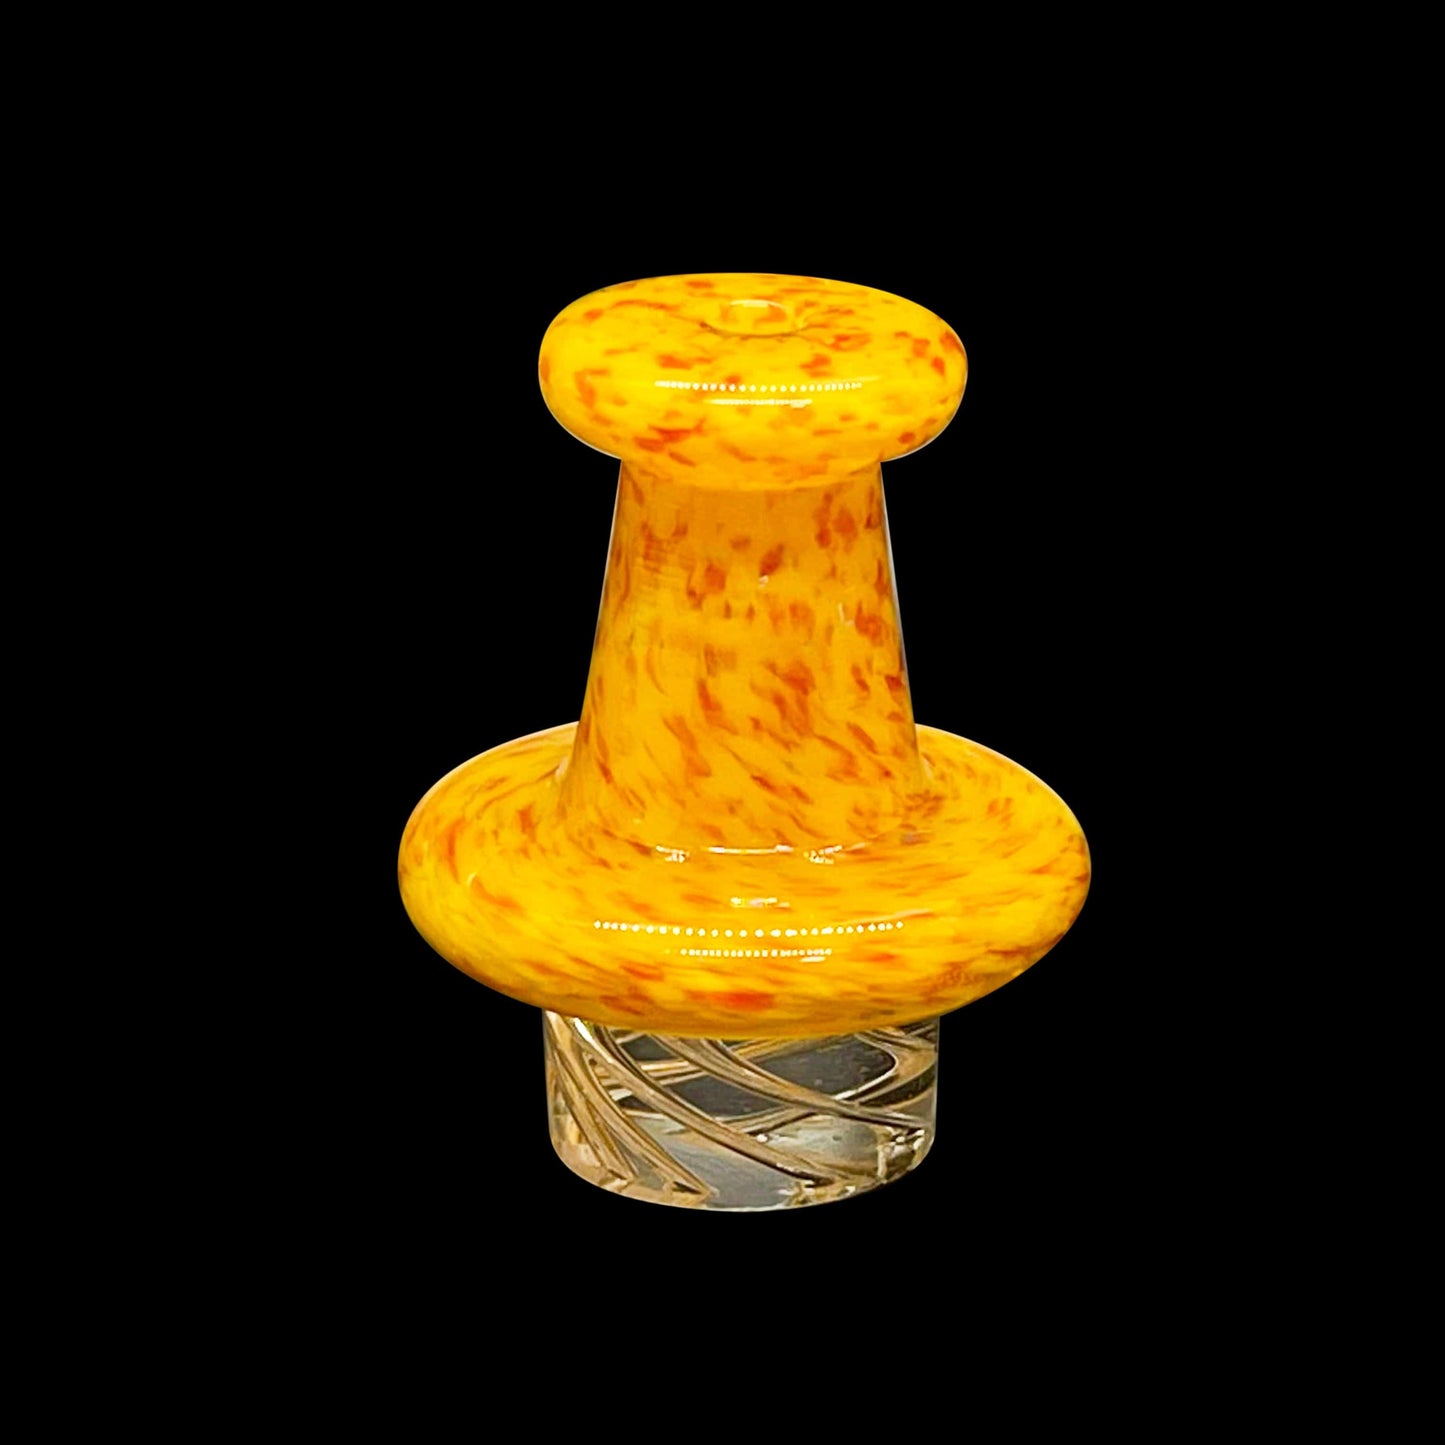 On Point Smoke - Yellow Koi N Silo Spinning Carb Cap for 25mm Quartz Bangers - OPS.com